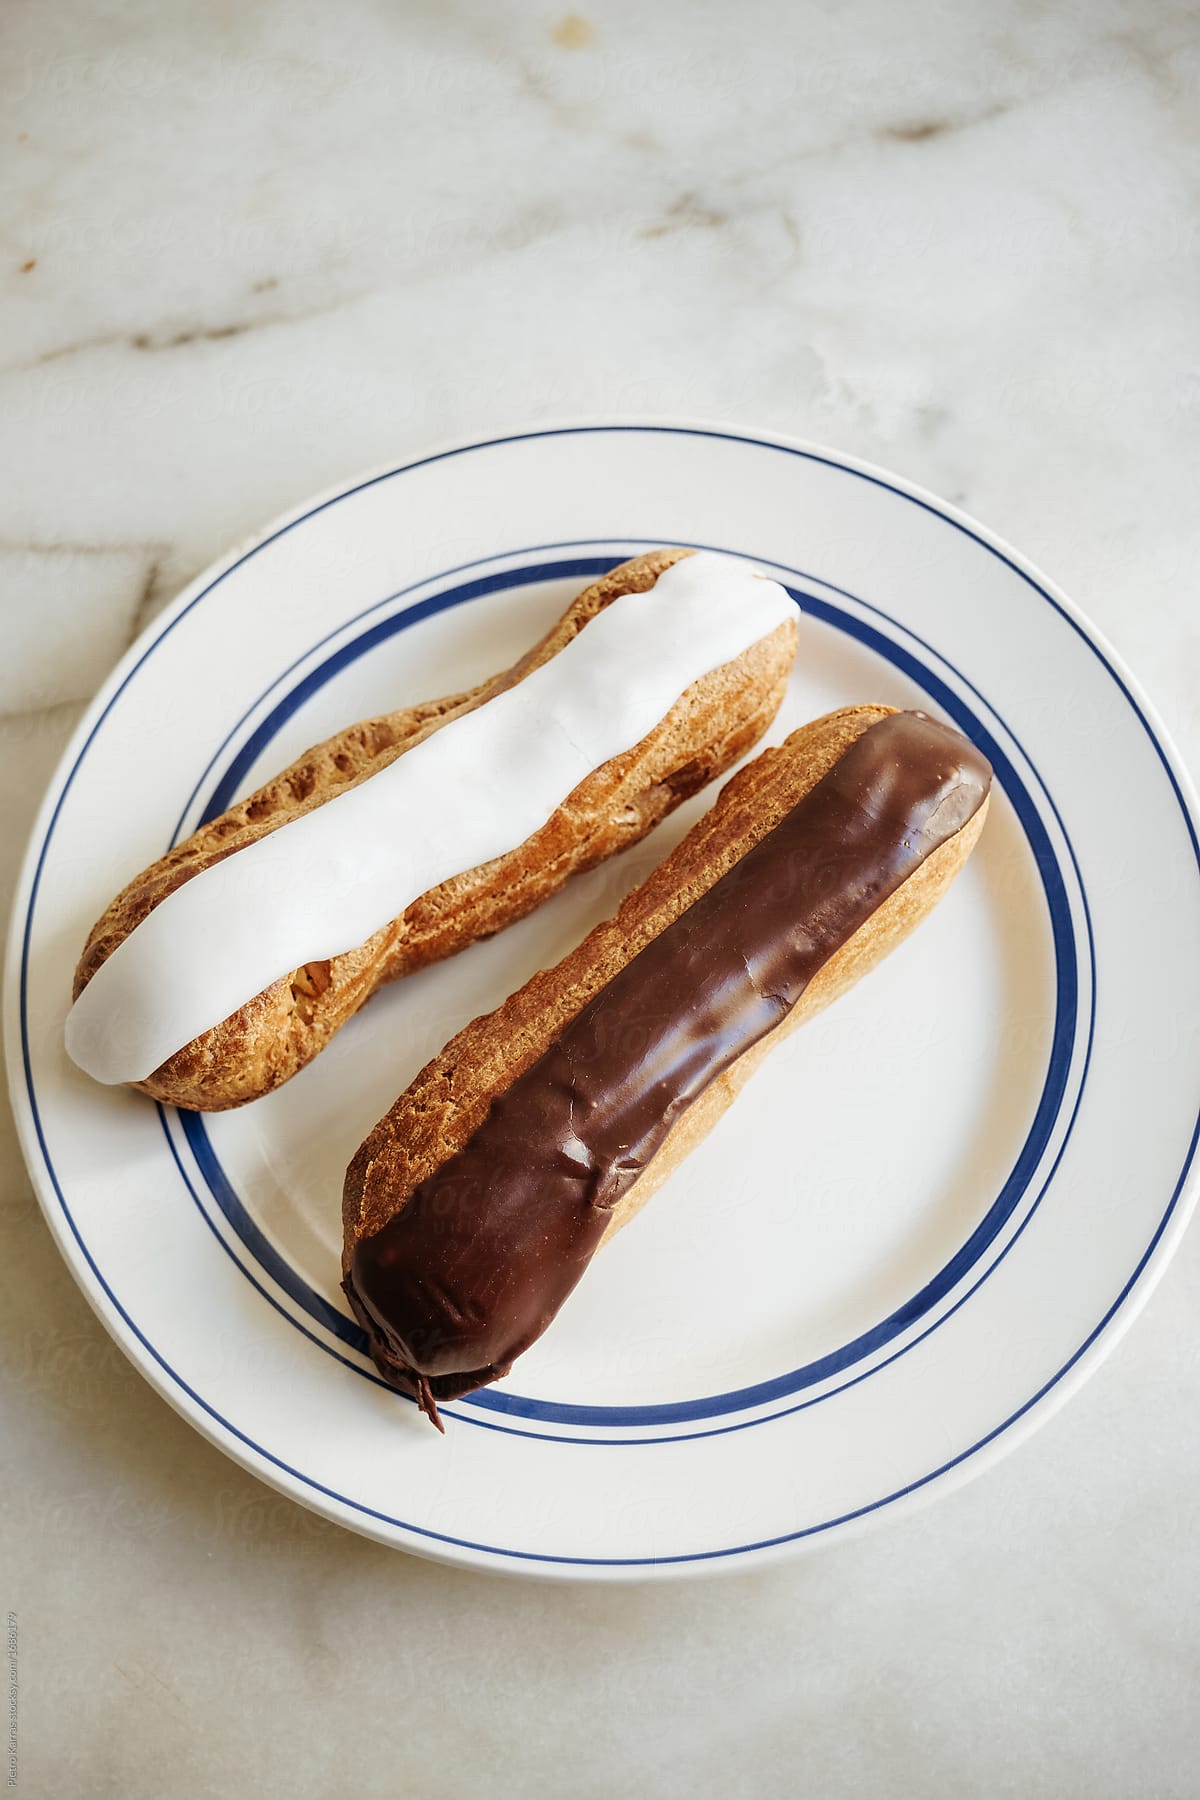 Two eclairs on a plate, ready to be eaten